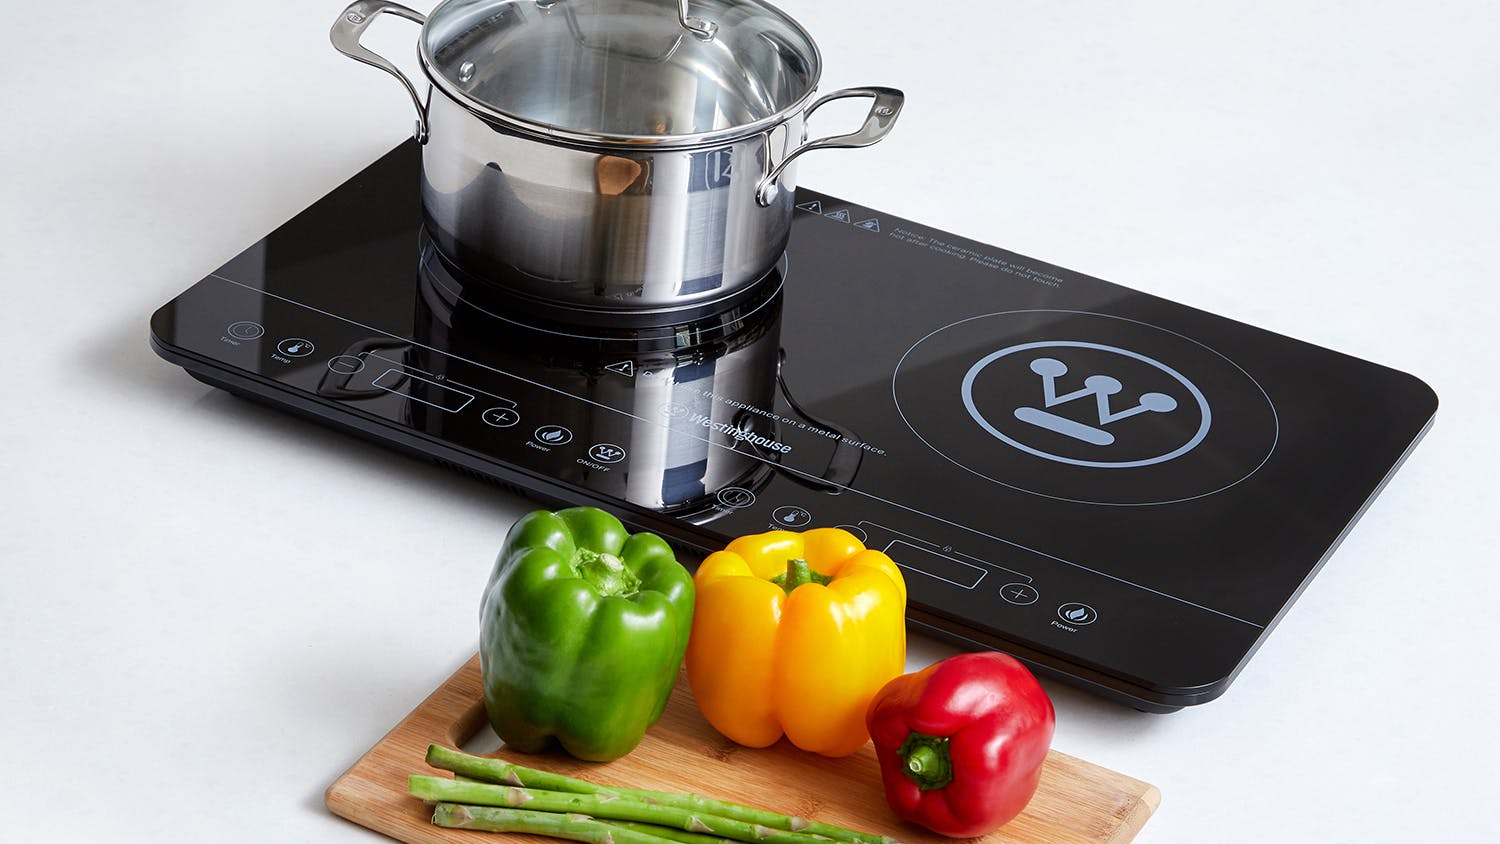 Westinghouse Twin Induction Portable Cooktop